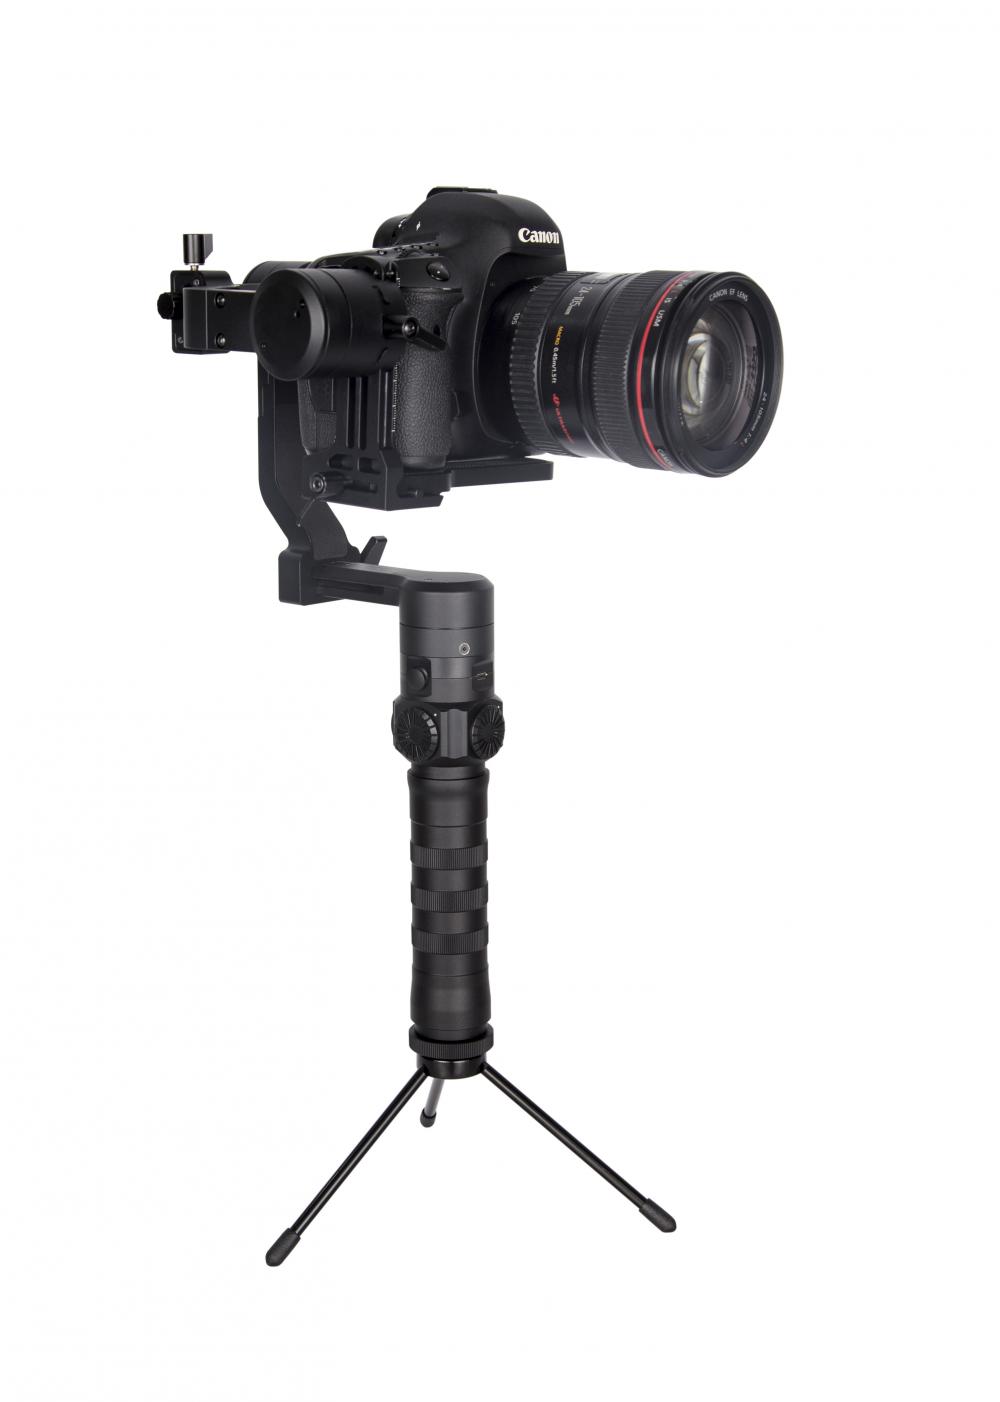 Easy to operate cheap gimbal for mirrorless